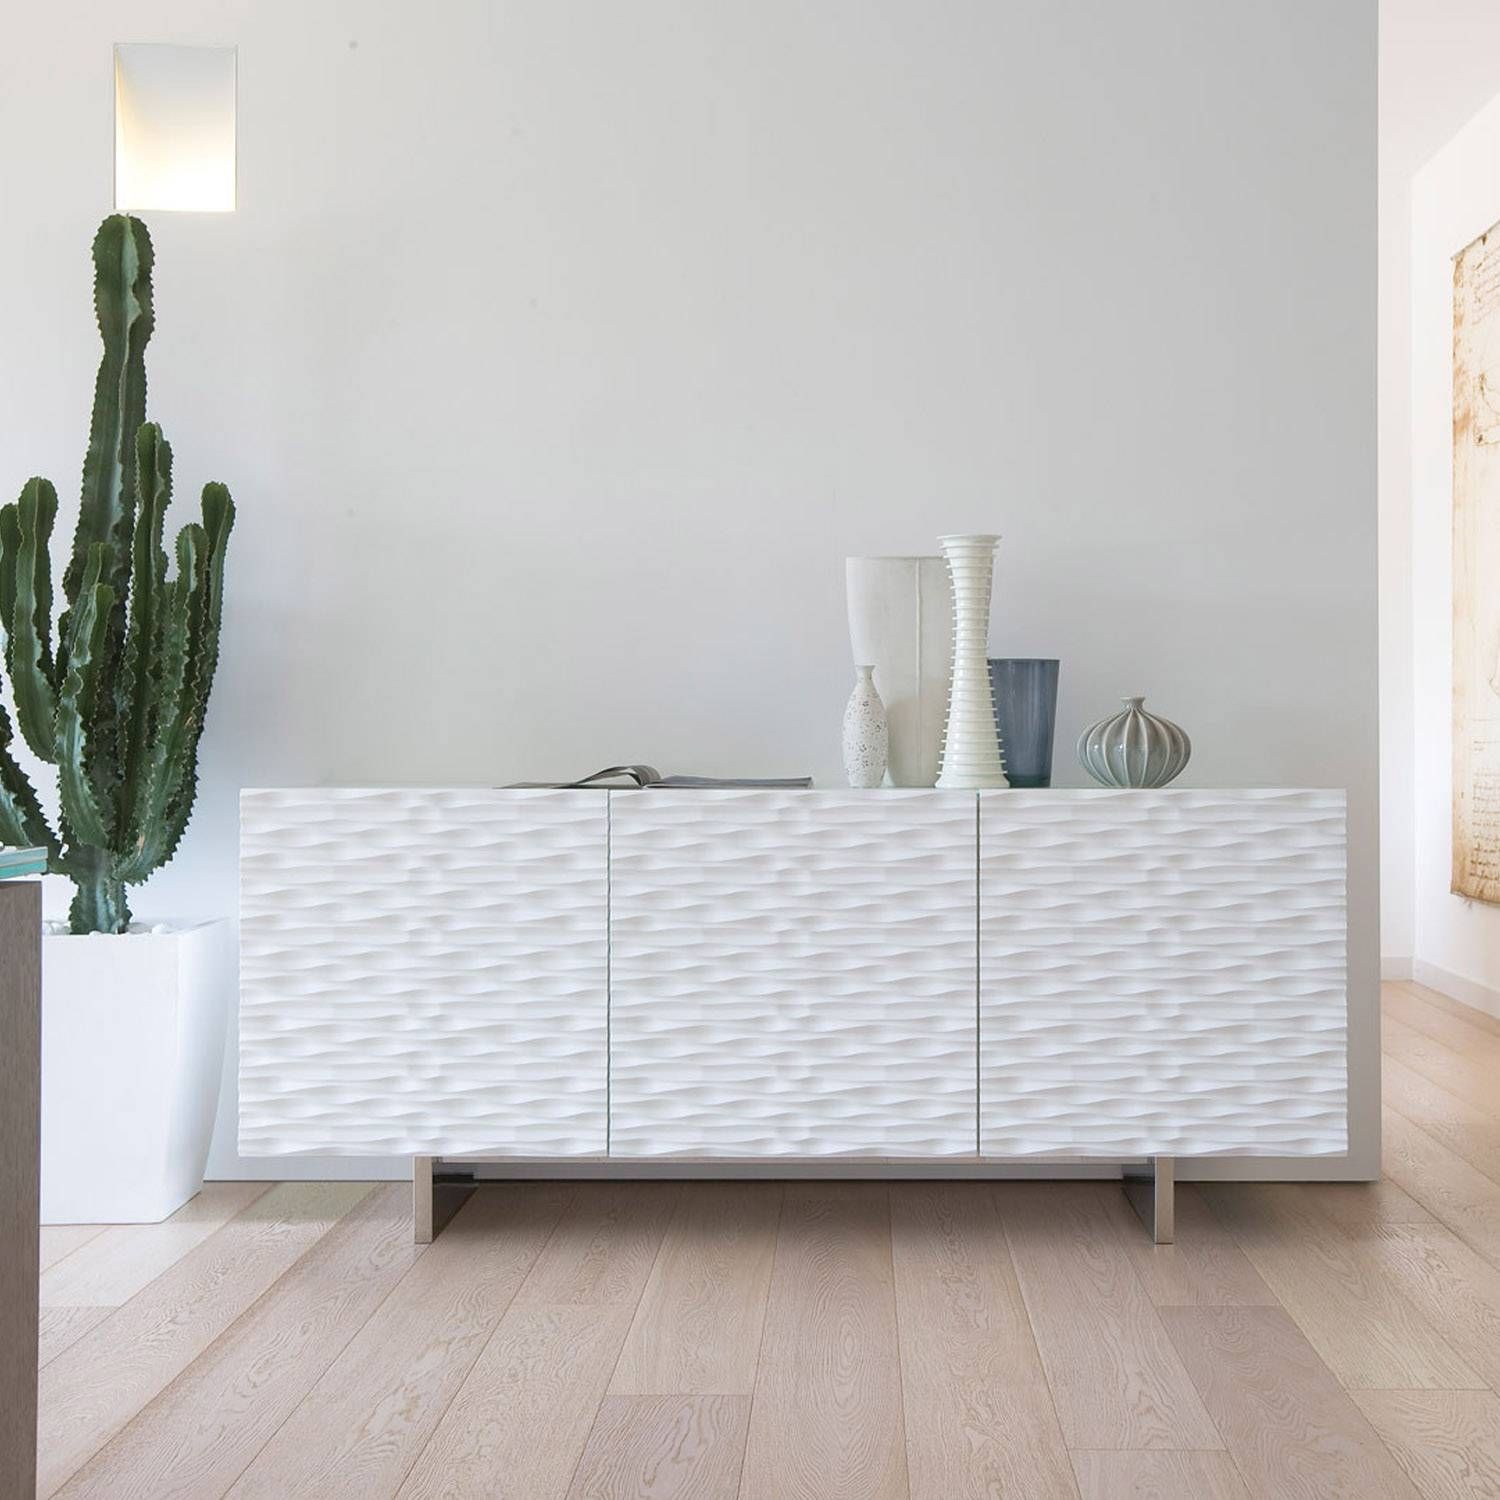 Sideboard With Laminate Or Lacquered Wooden Frame, With 3 Textured Intended For Contemporary White Sideboard (View 11 of 20)